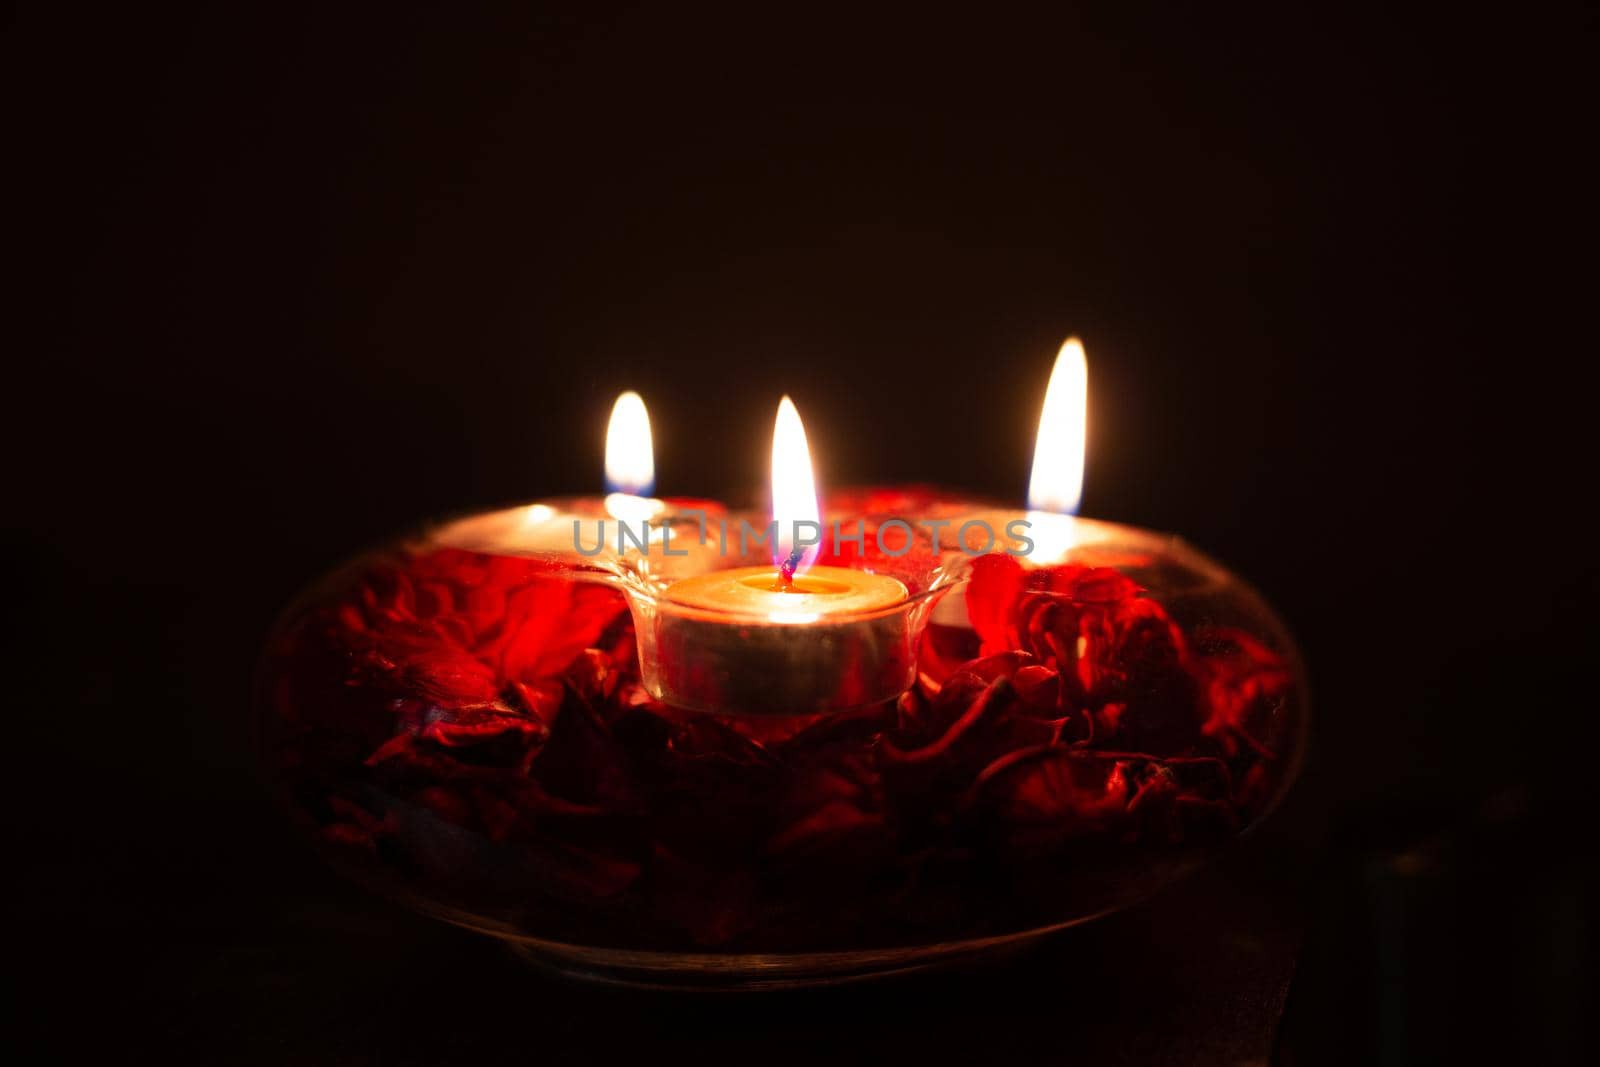 red candles in a candlestick on a black background by levnat09